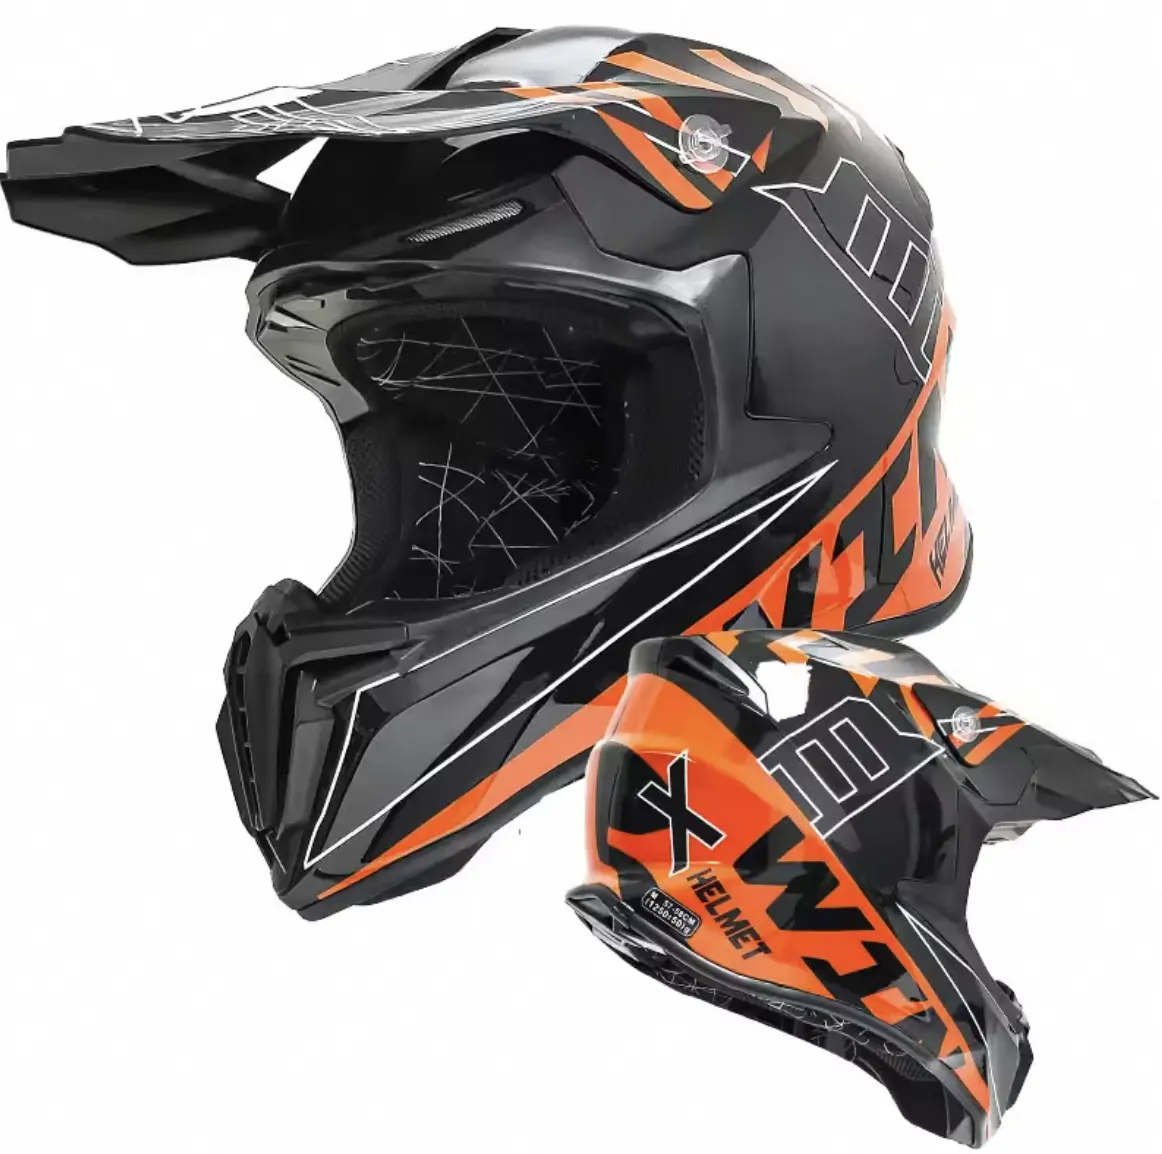 China Full Face Helm Dot Mountain Racefiets Roer Volwassen Maat Unisex Cross Country Safety Motorfiets Abs Racehelm